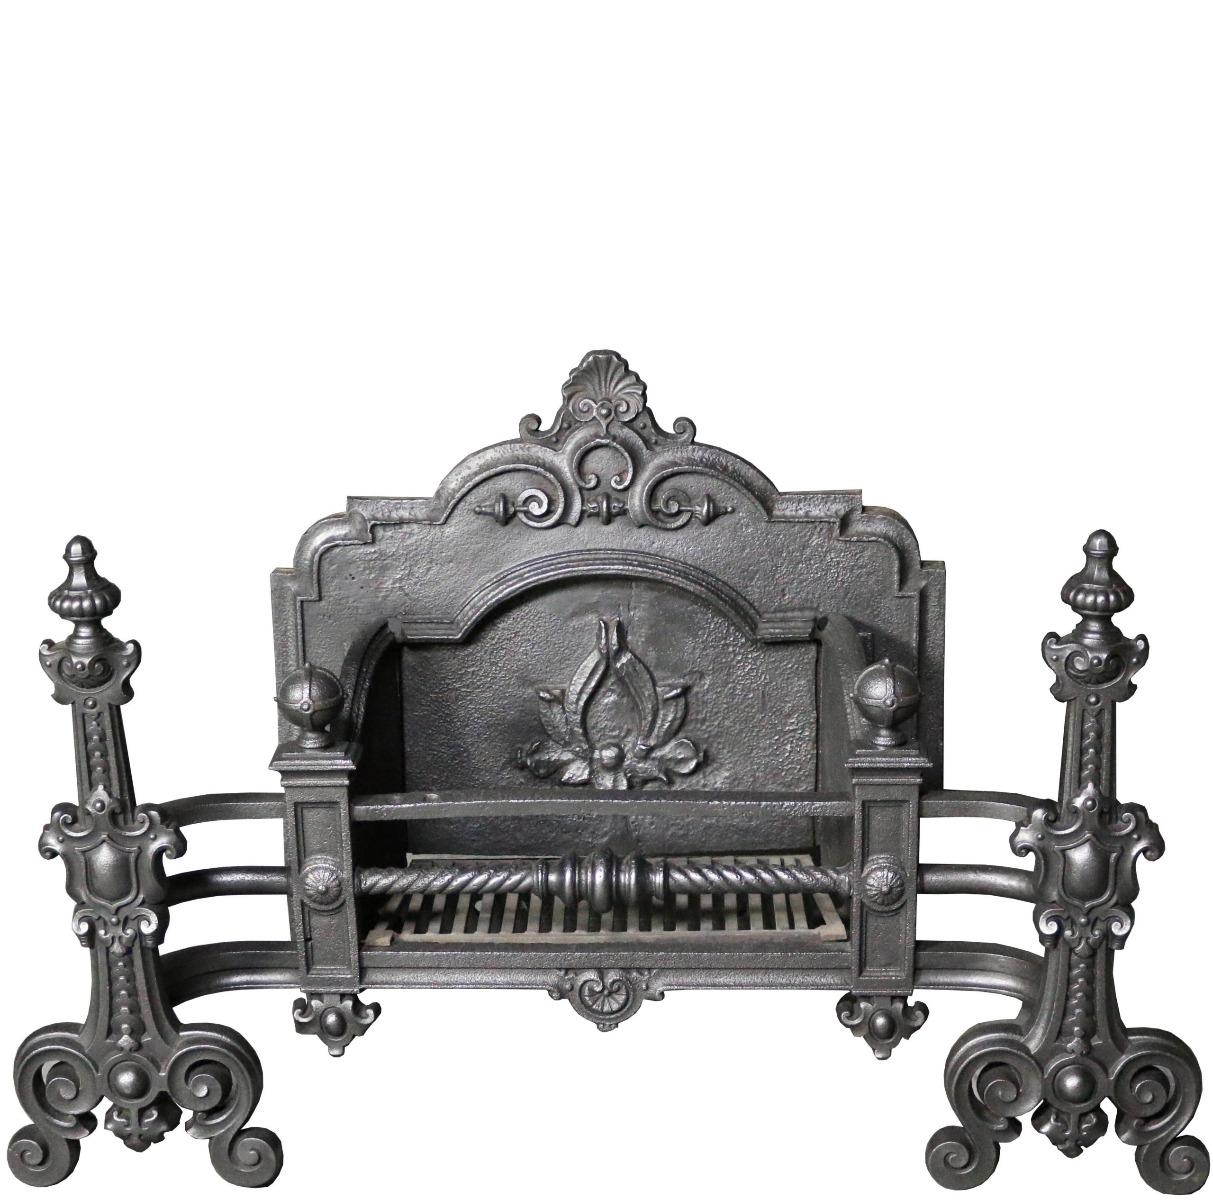 A late Victorian fire grate with shaped bars and urn finials.